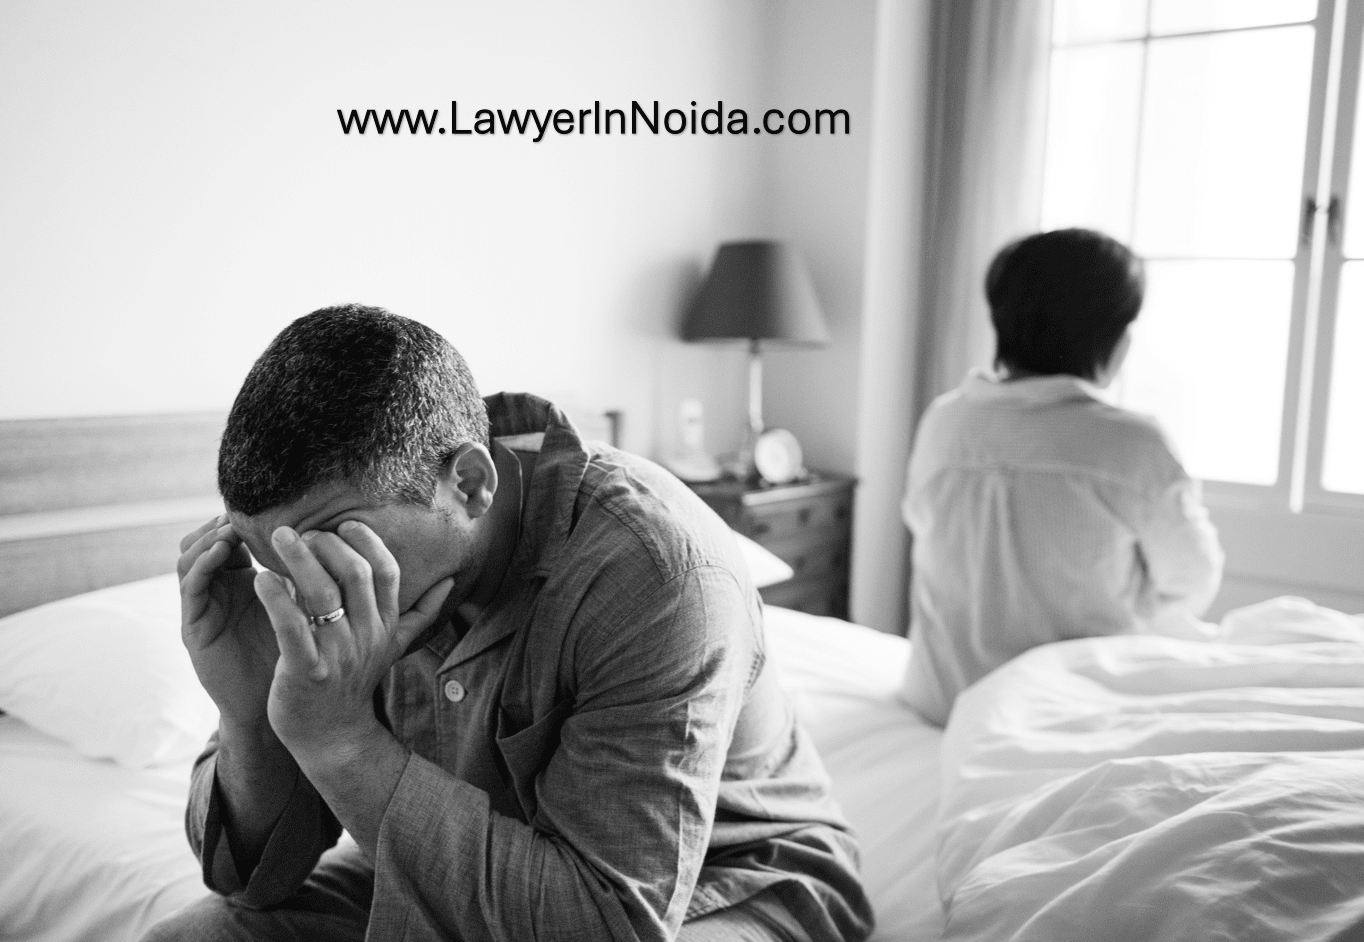 Premier Contested Divorce Lawyer Serving Noida: Your Trusted Legal Advocate